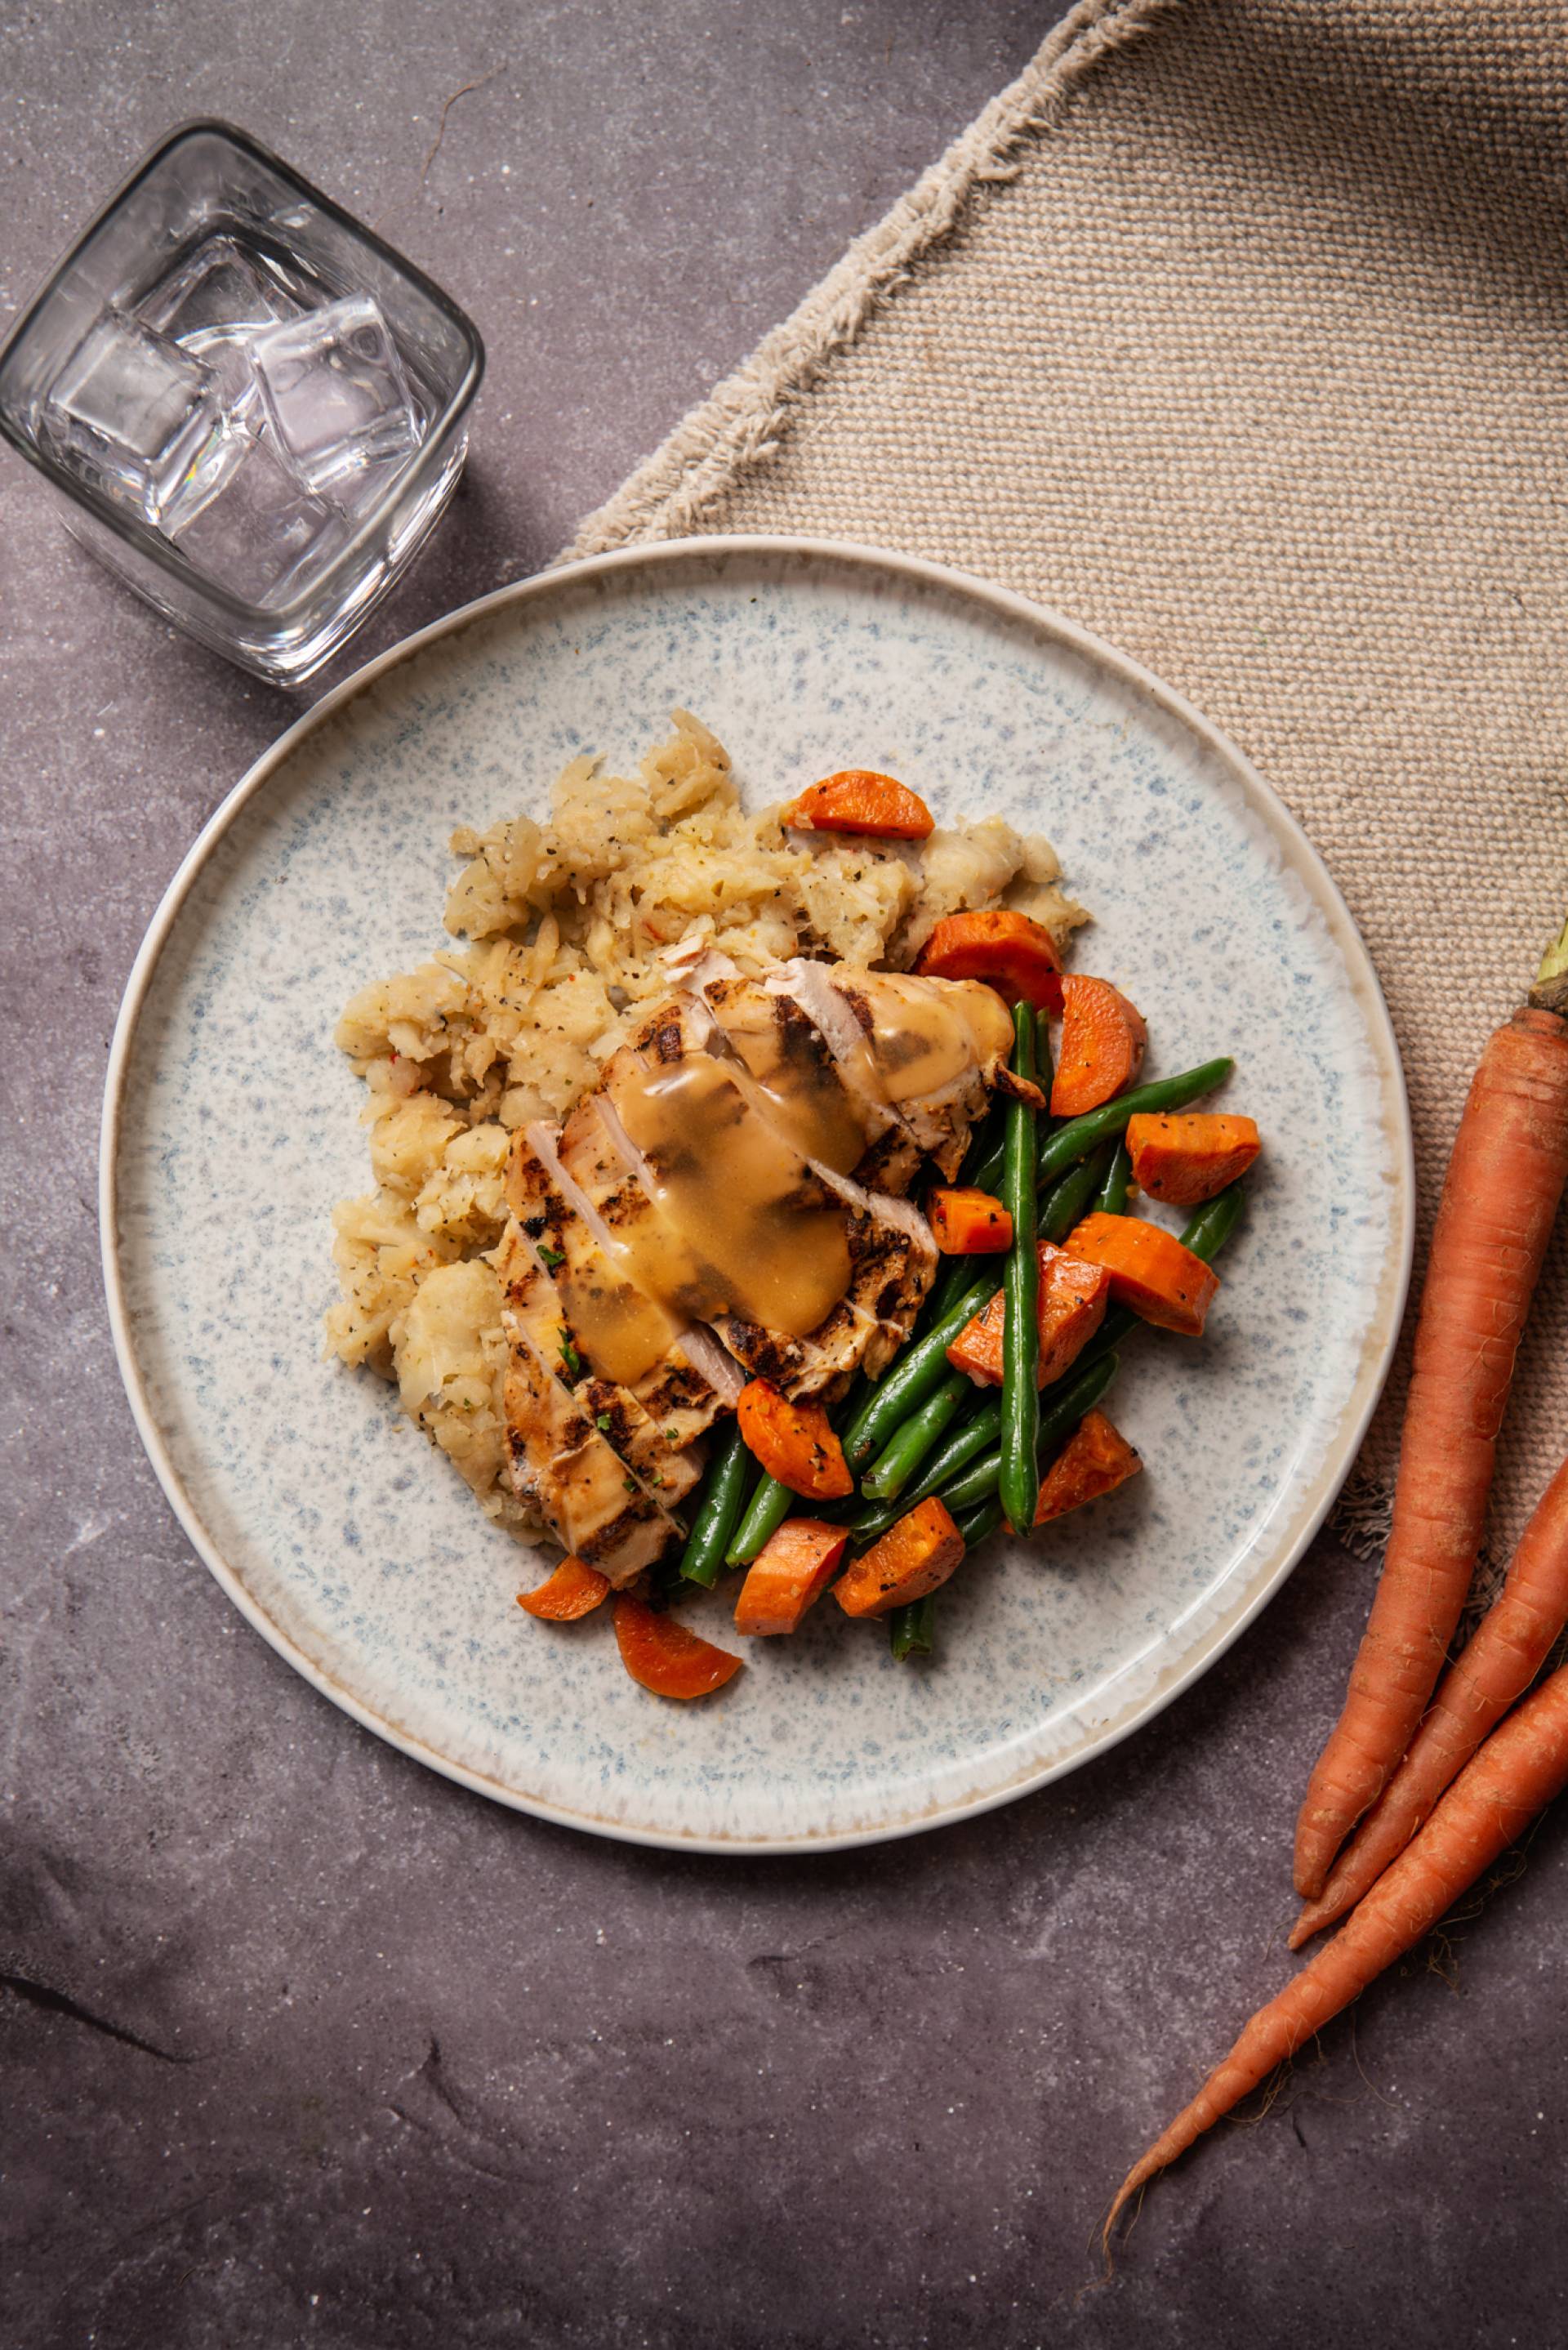 FITNESS: Baked Chicken Breast with Gravy (LOW CARB)